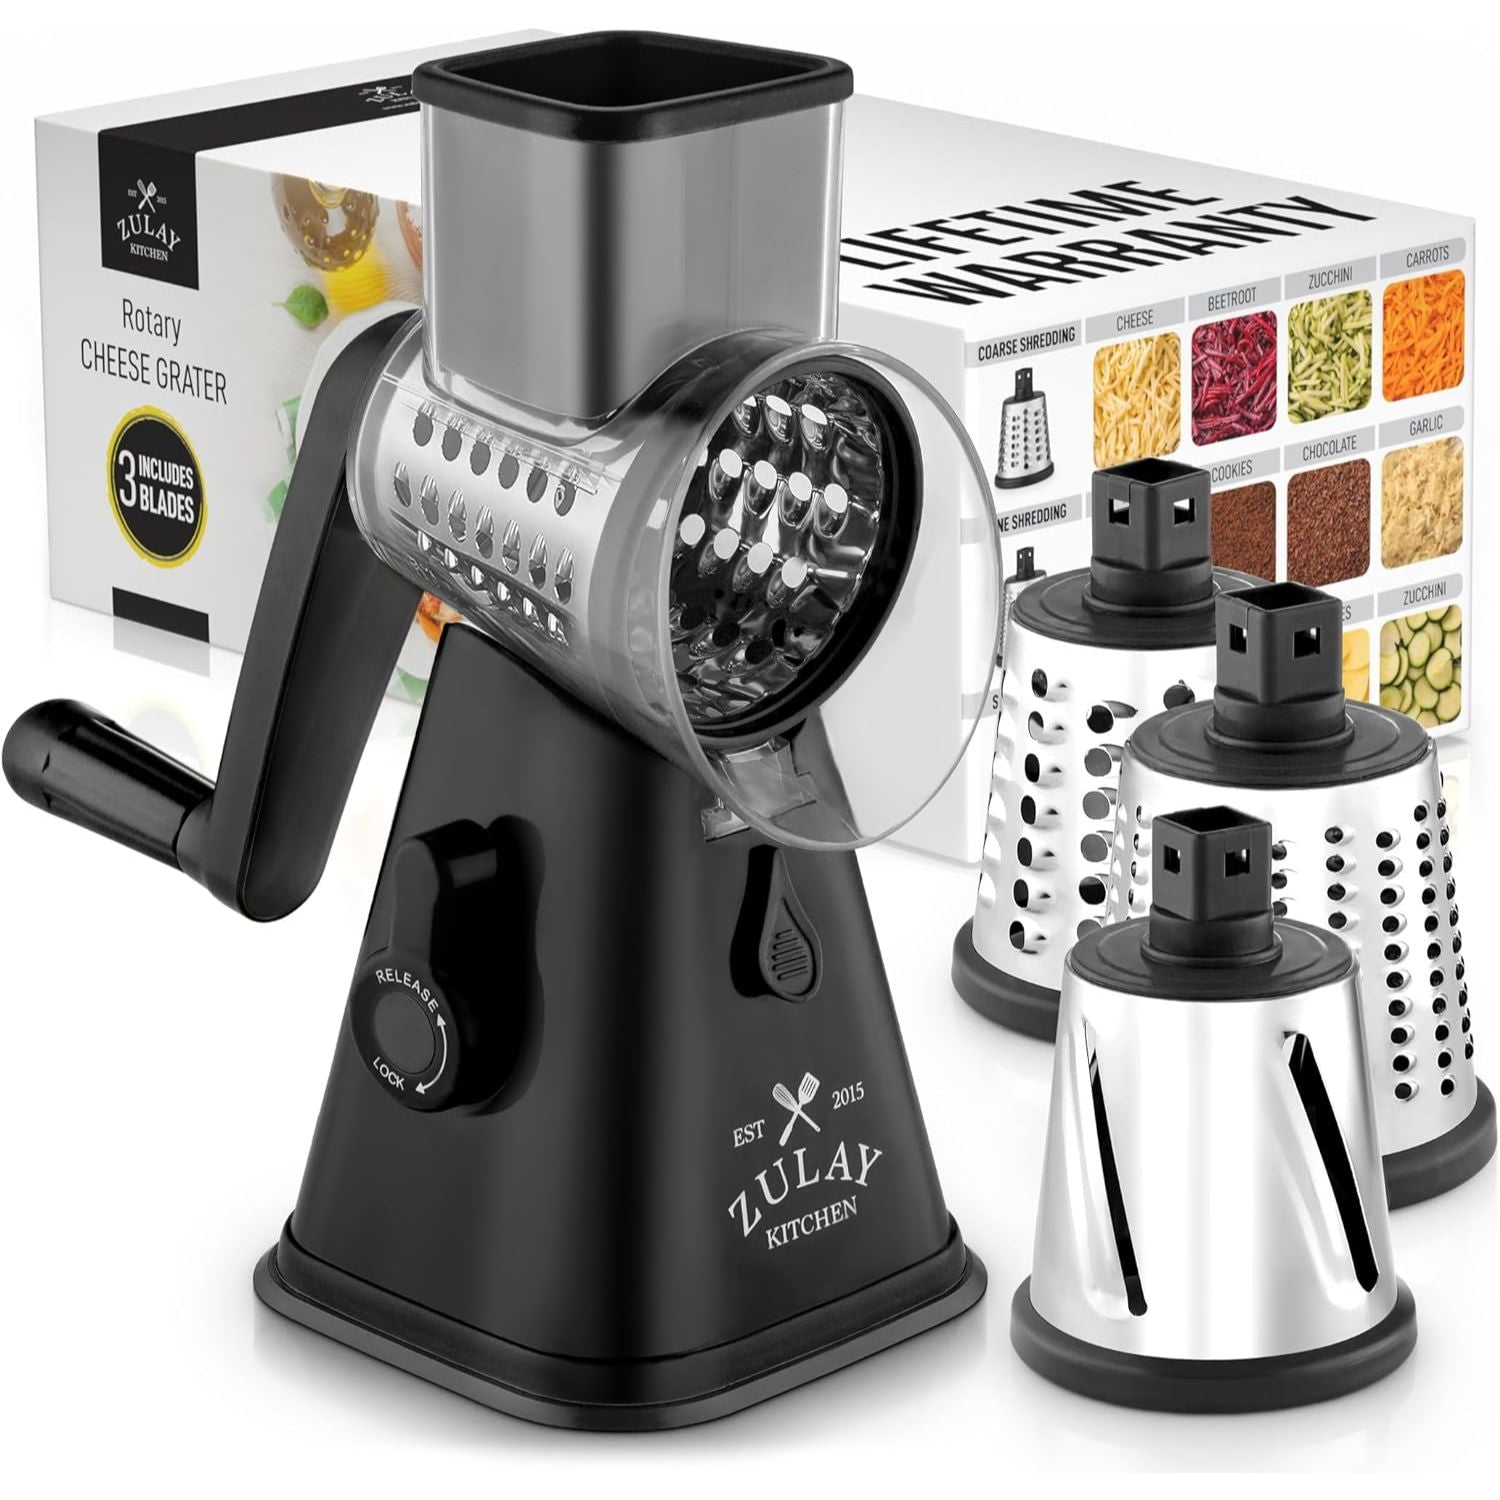 Black Rotary Cheese Grater with 3 Replaceable Drum Blades